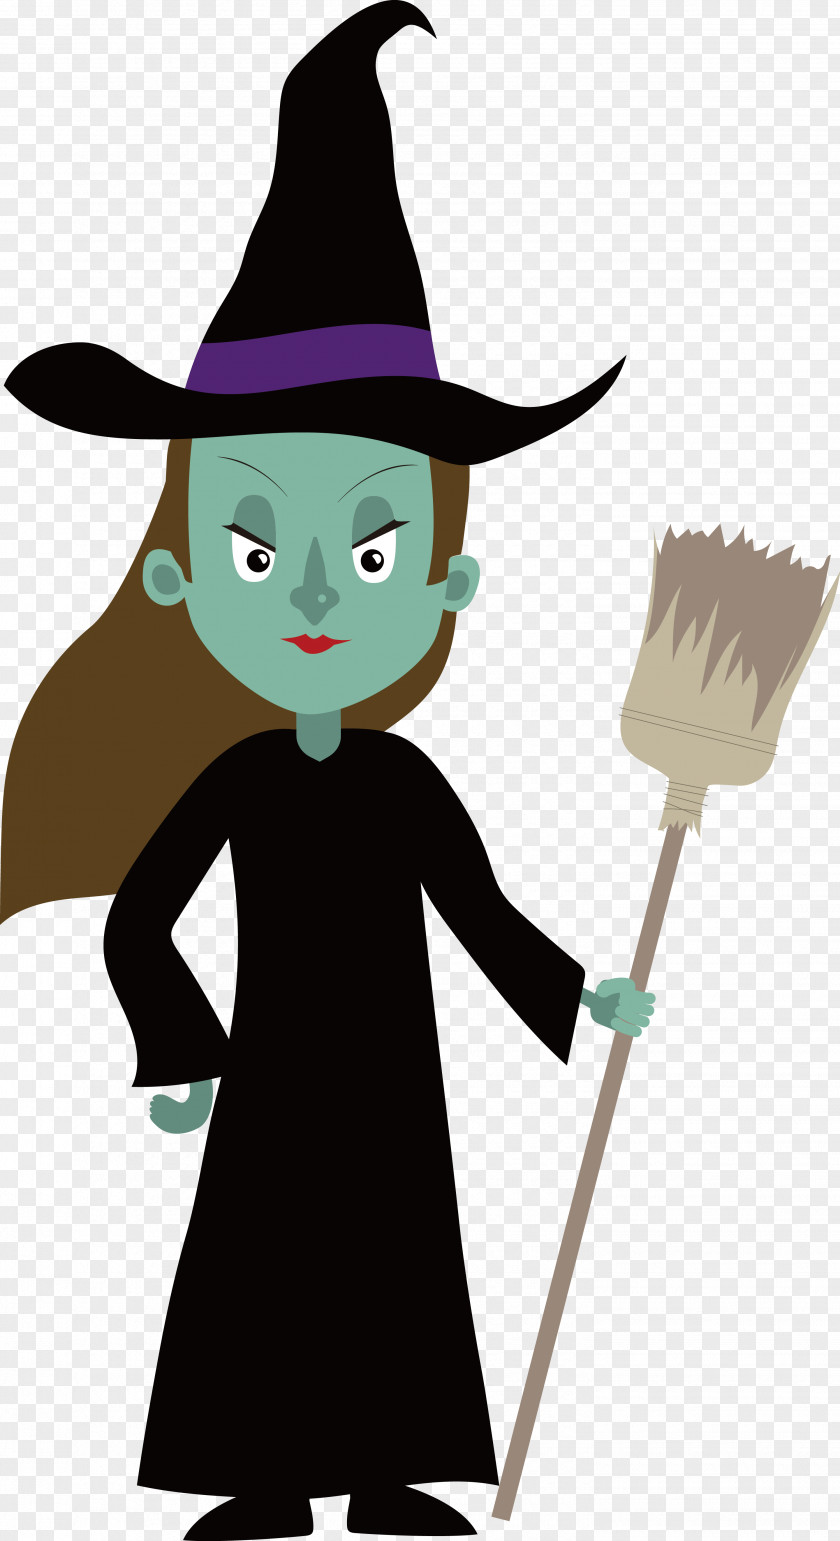 Black Witch Vector Boszorkxe1ny Disguise Halloween Illustration PNG